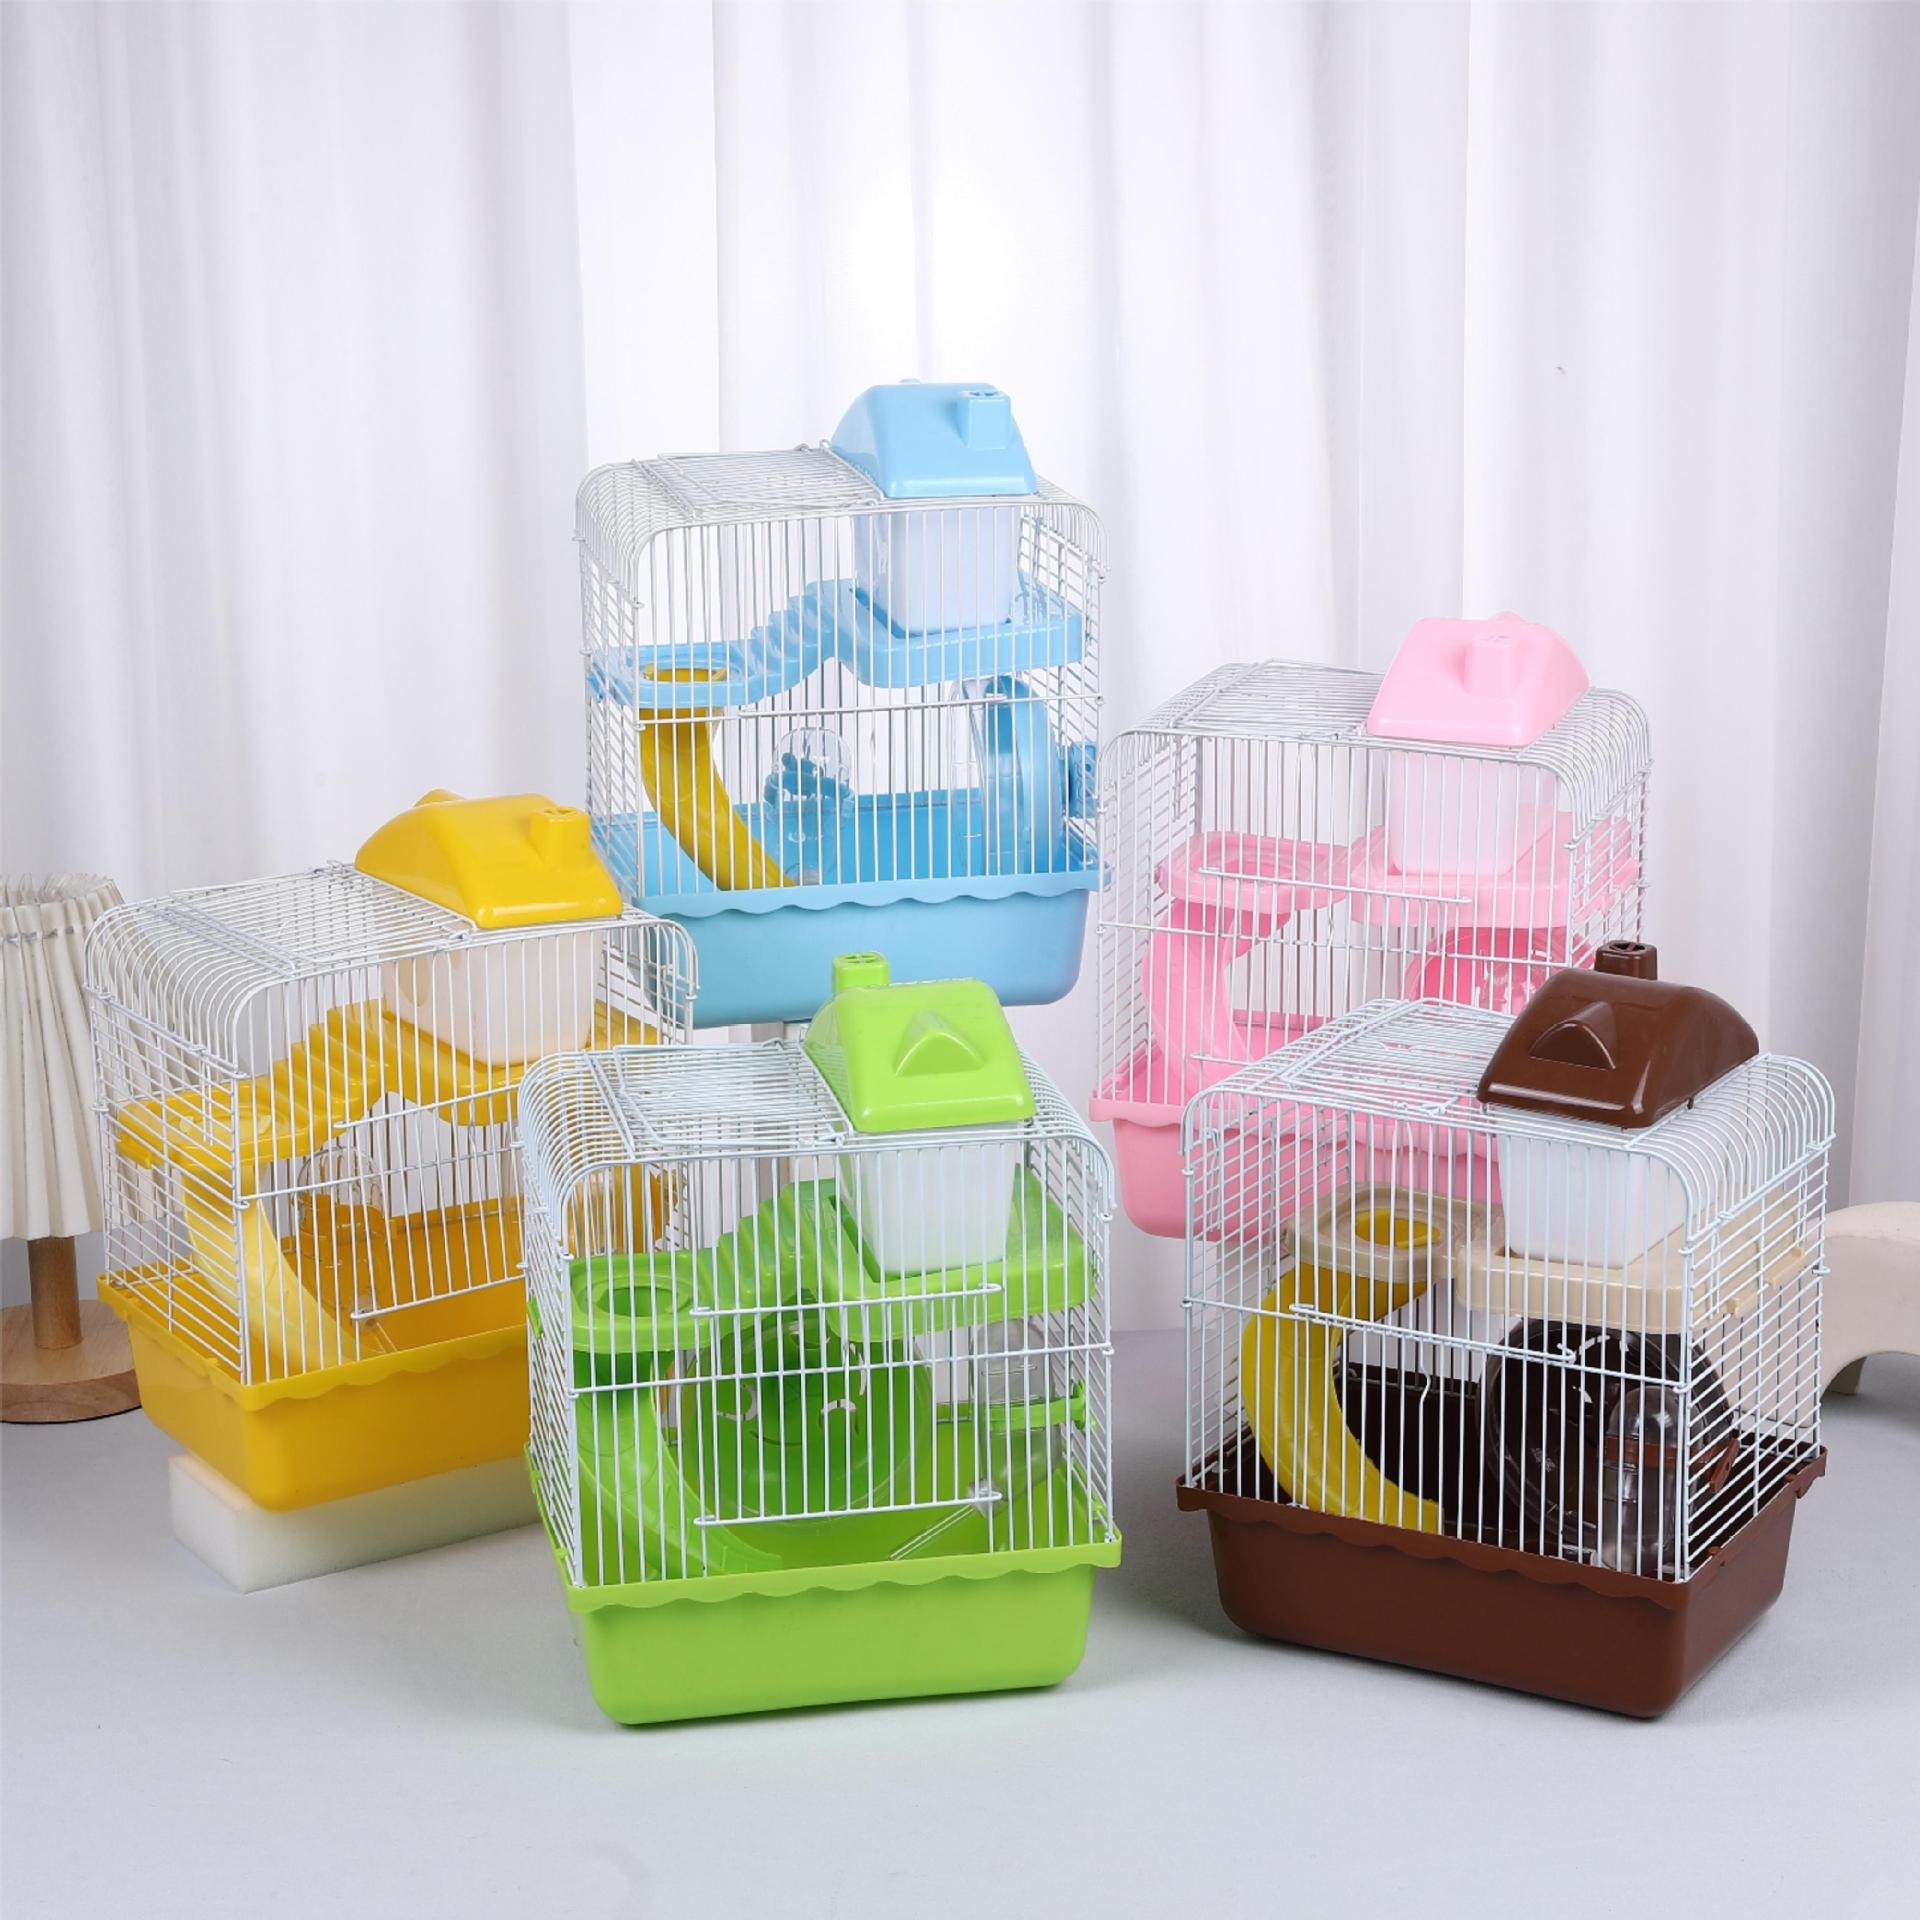 Small Pastoral Hamster Cage Castelet Hamster Supplies Double-Layer Anti-Escape Portable Outdoor Large Hamster Cage Factory Wholesale